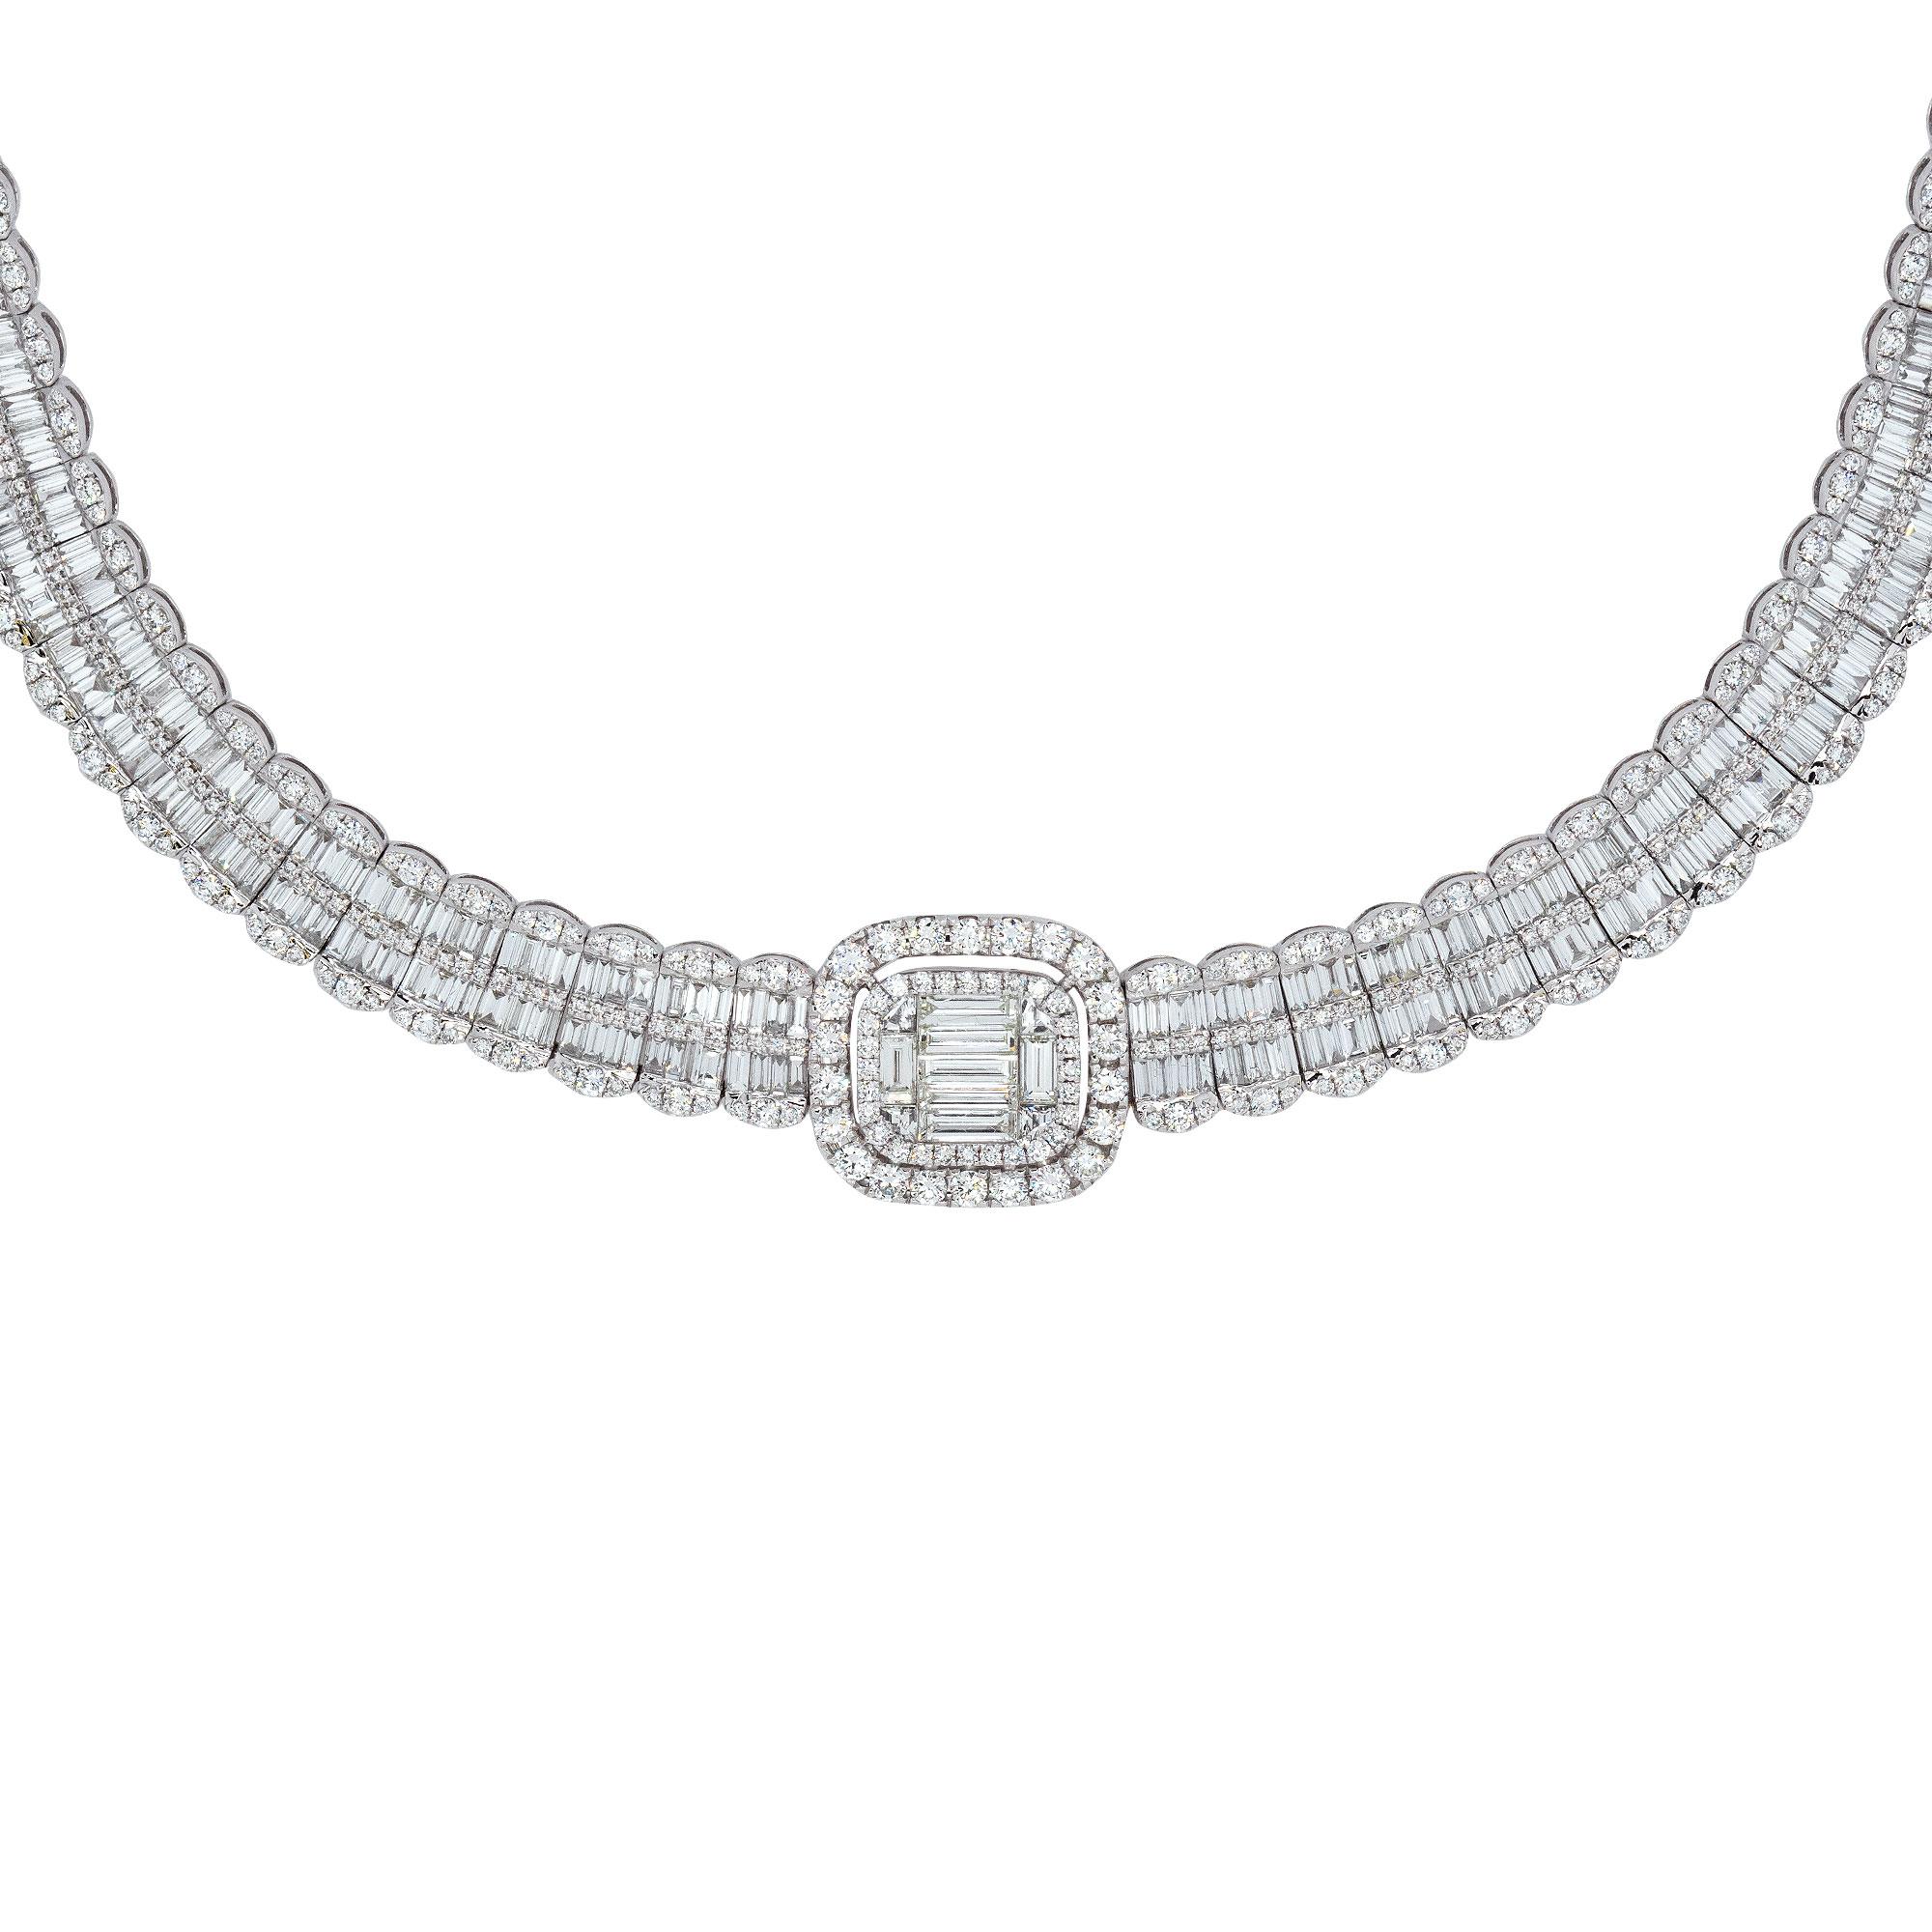 Elevate your style with the captivating allure of this 18k White Gold 30.68ctw Round & Baguette Diamond Illusion set Necklace. Meticulously crafted in 18k white gold, this exquisite piece features a mesmerizing diamond pave, showcasing approximately